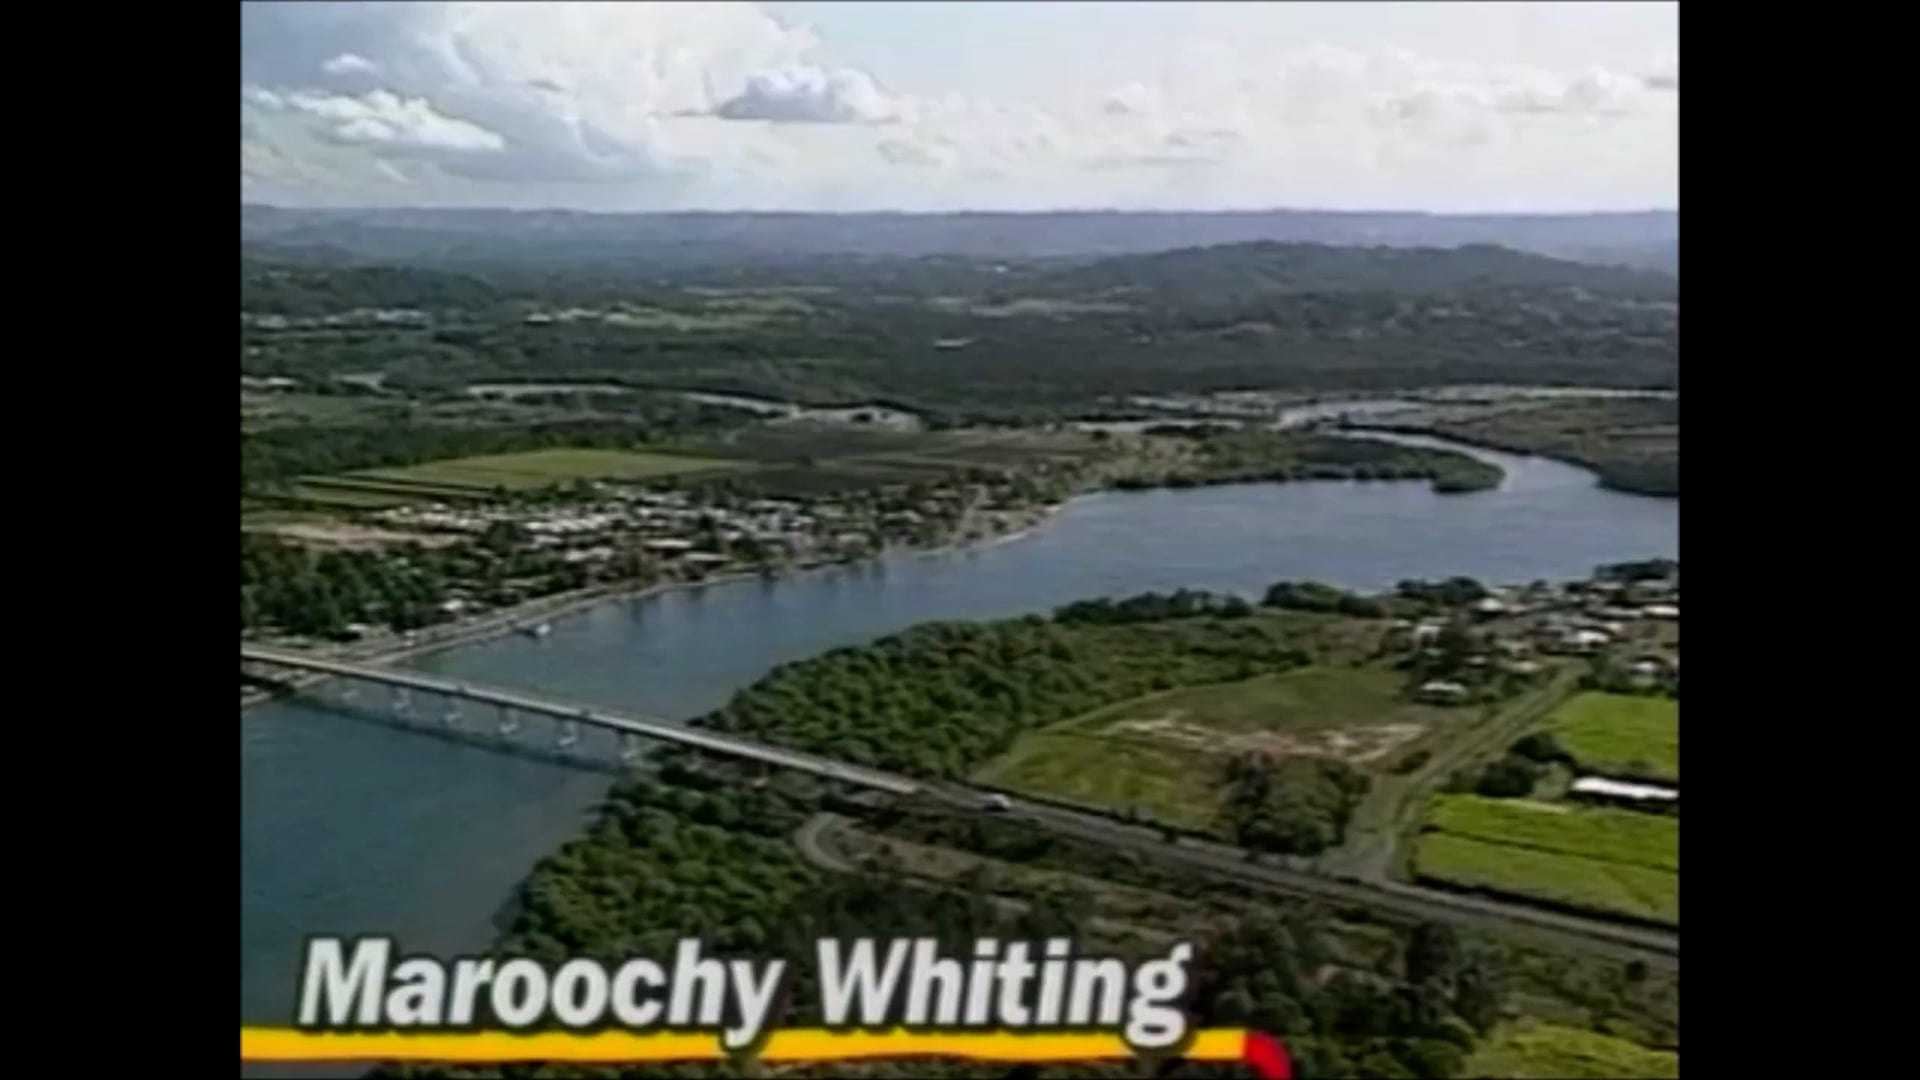 Maroochy River Whiting – Aaron Fogarty